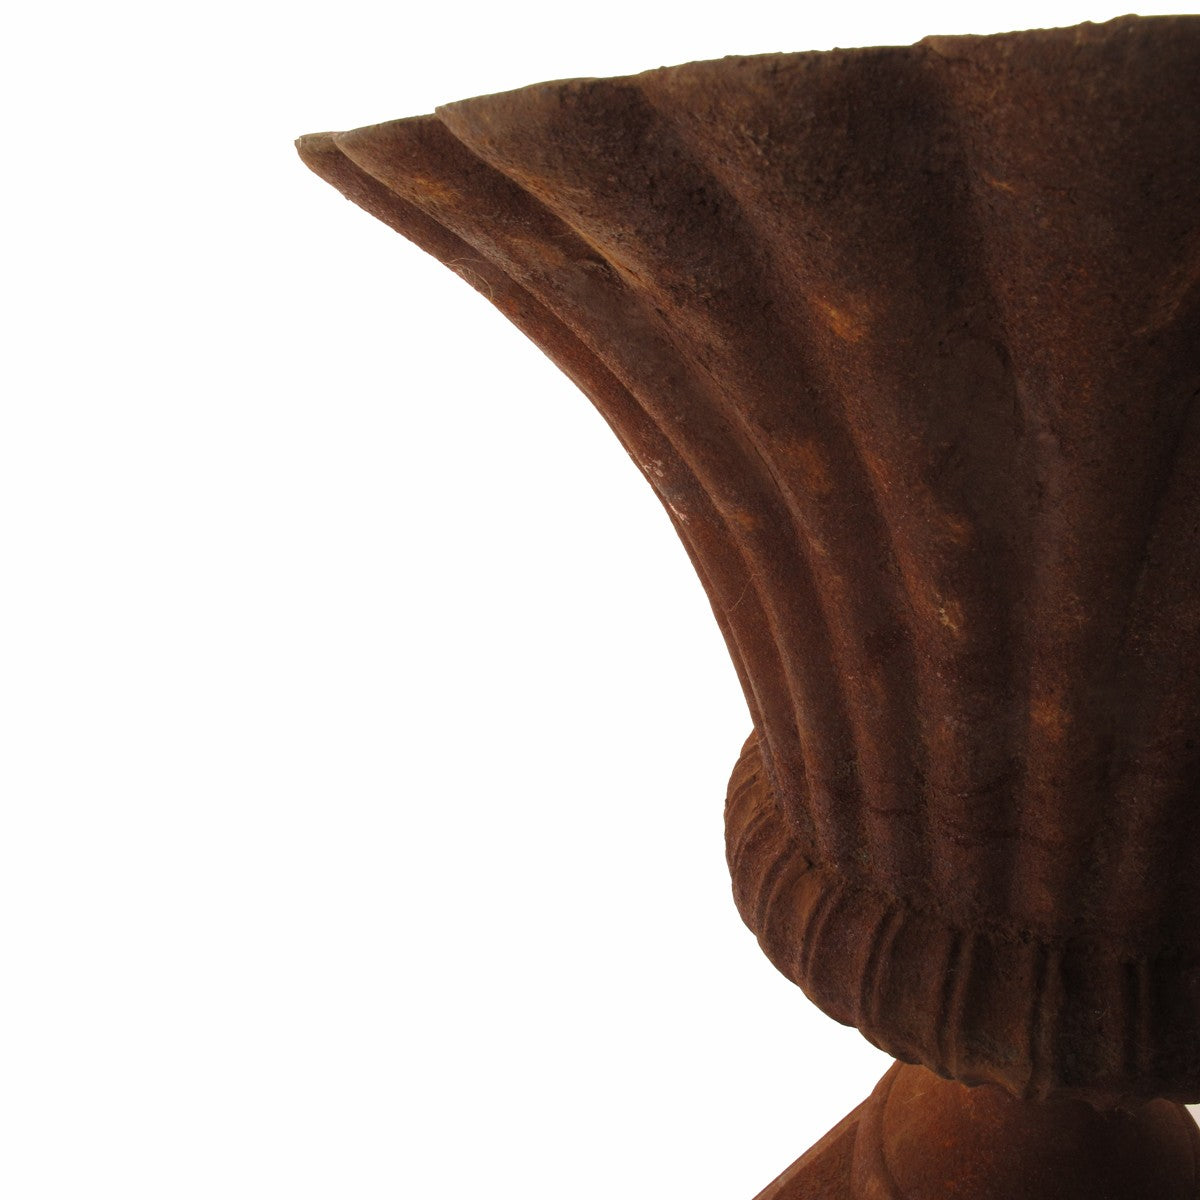 Ribbed Urn, Rust - Large